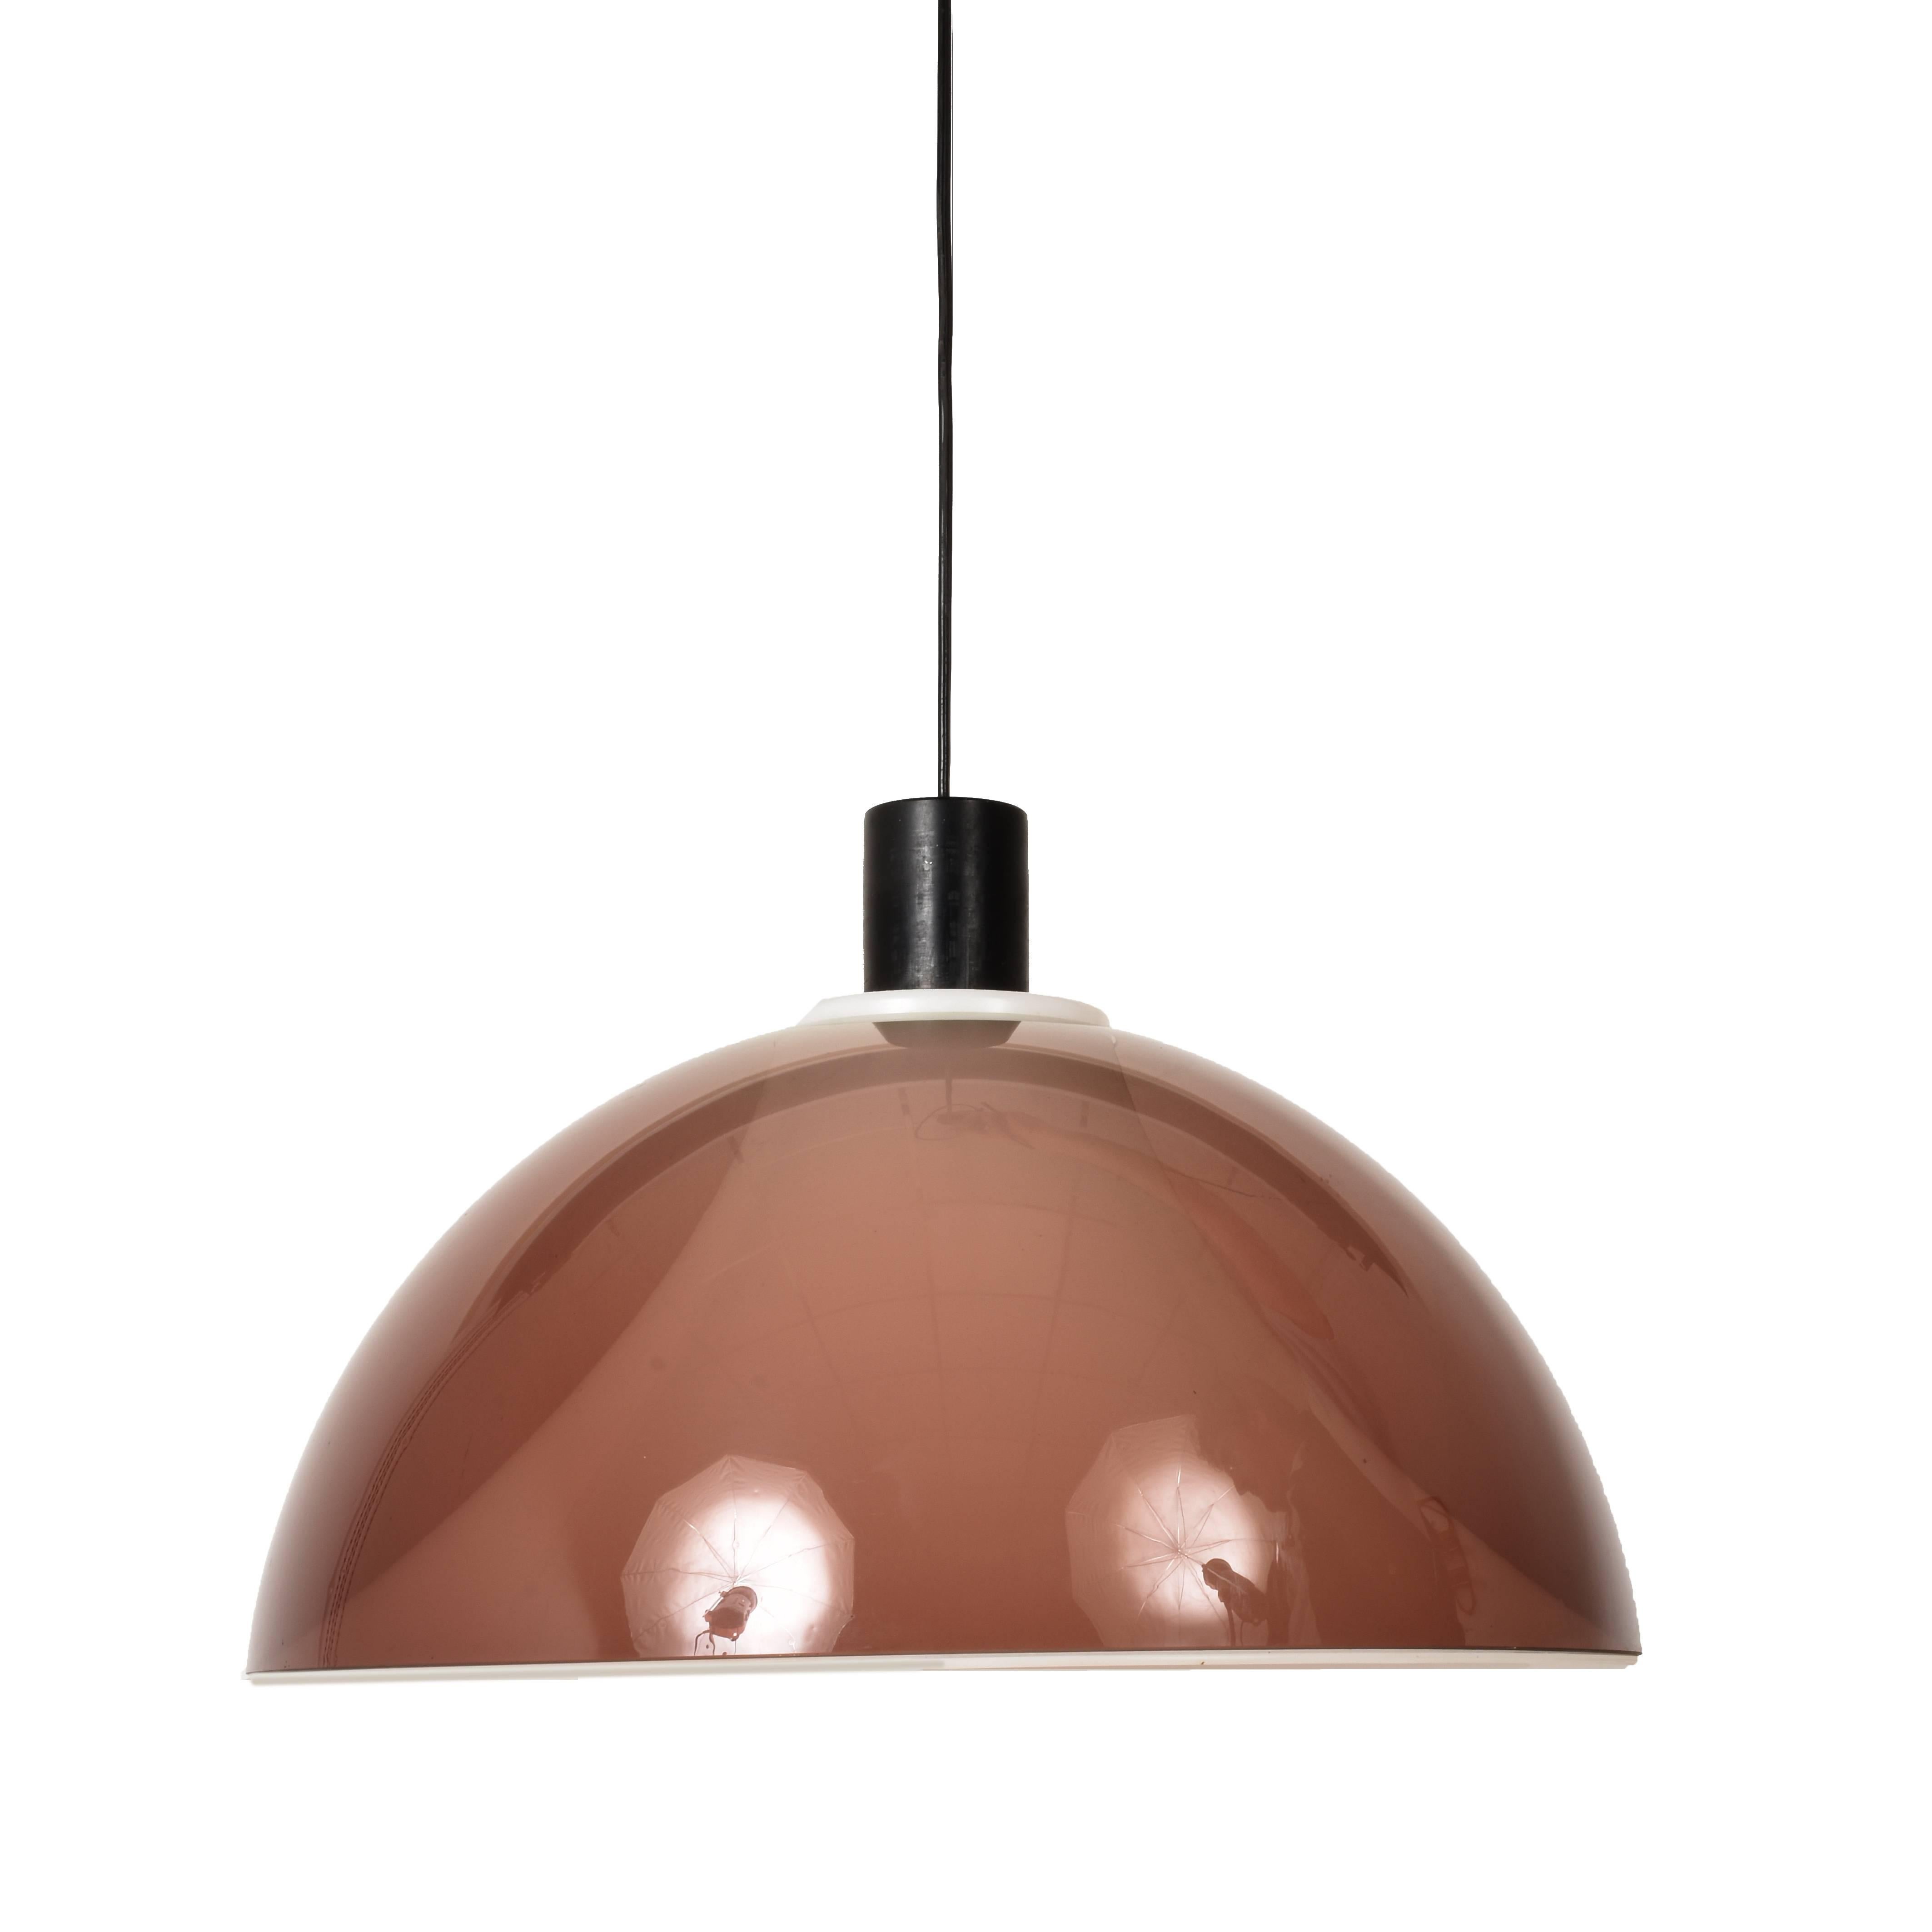 Stilux pendant lamp. Signed and with original canopy in excellent condition.